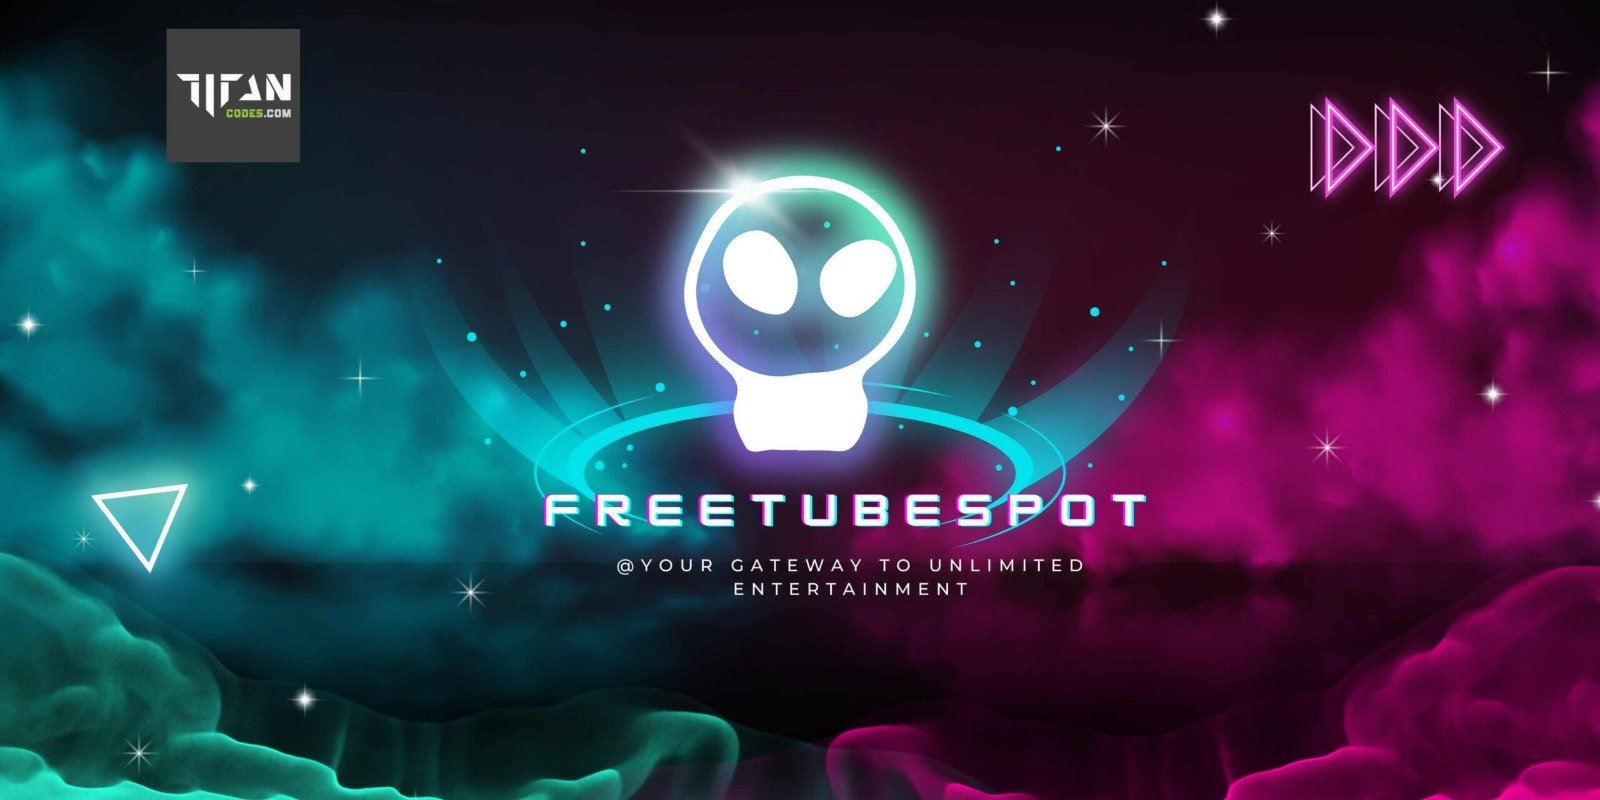 Discovering Freetubespot: The ultimate free online video training is here to help you